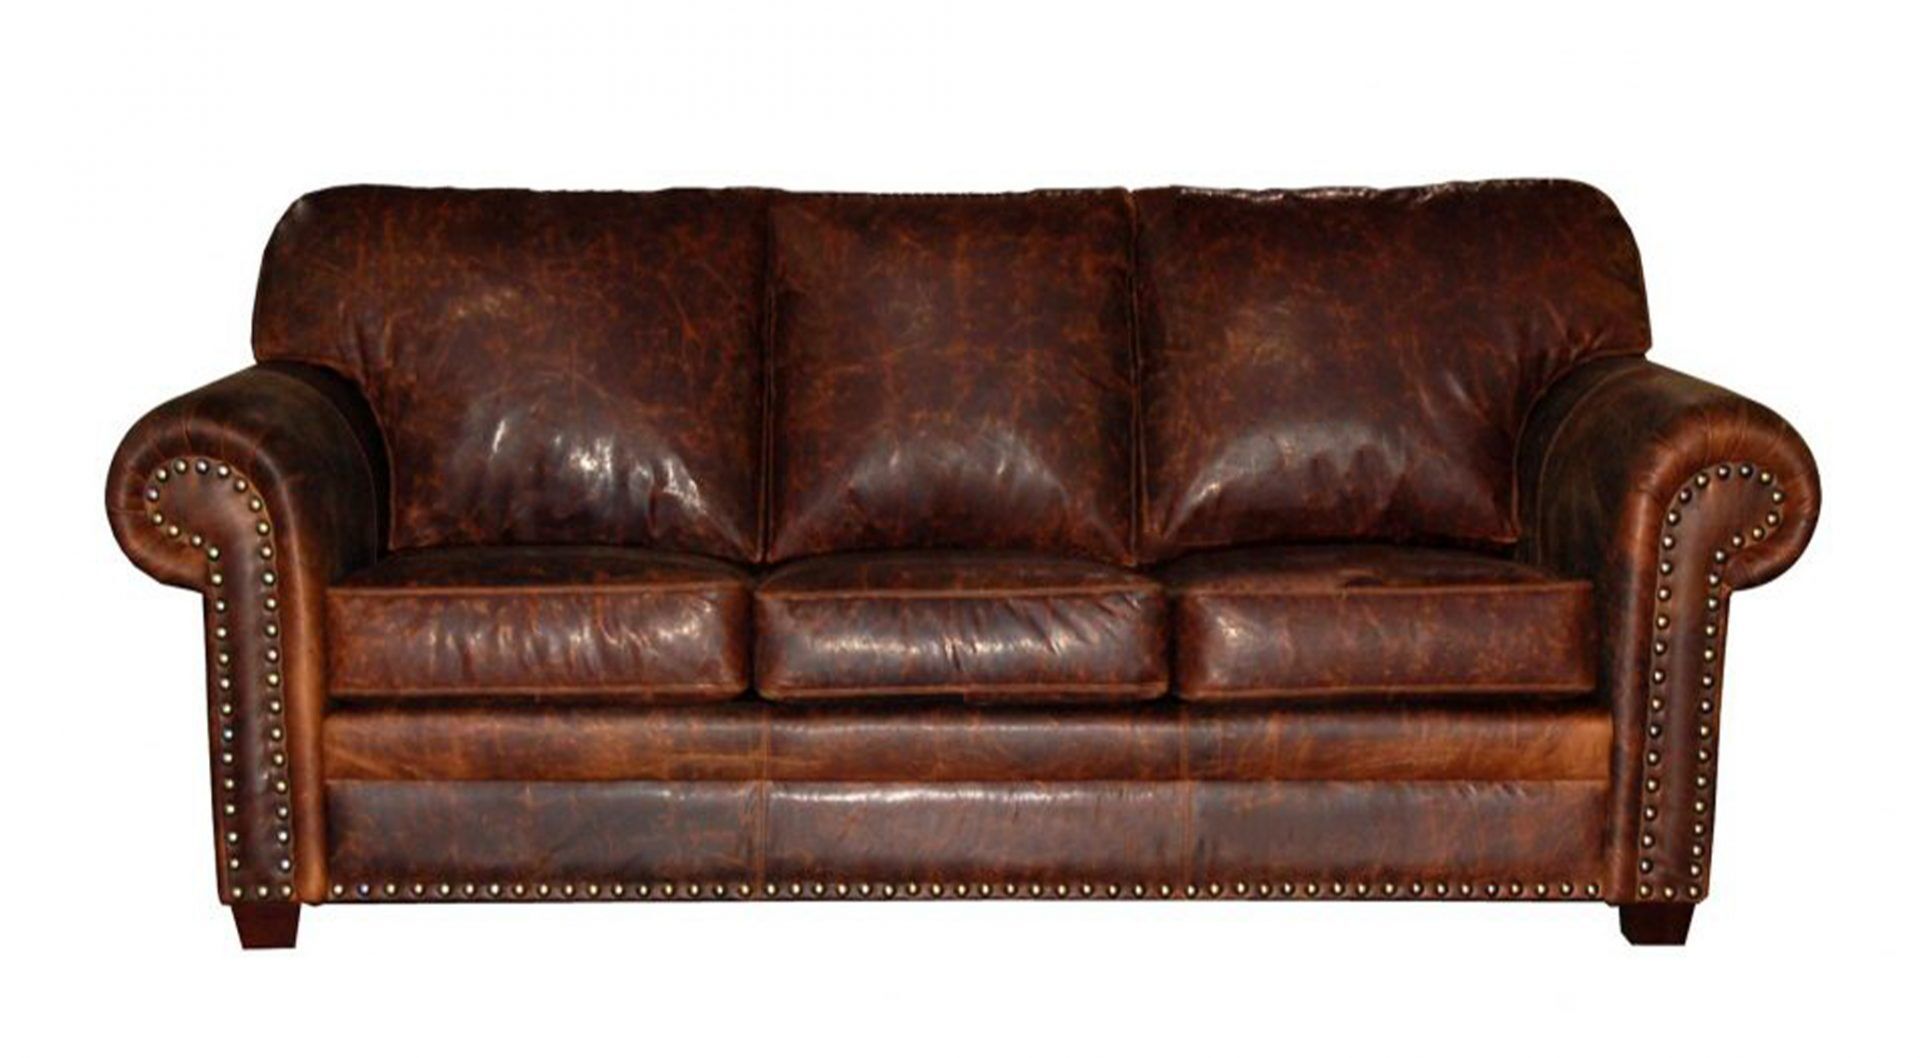 Cowboy Leather Sofa Raw Home, Distressed Leather Couch Setup